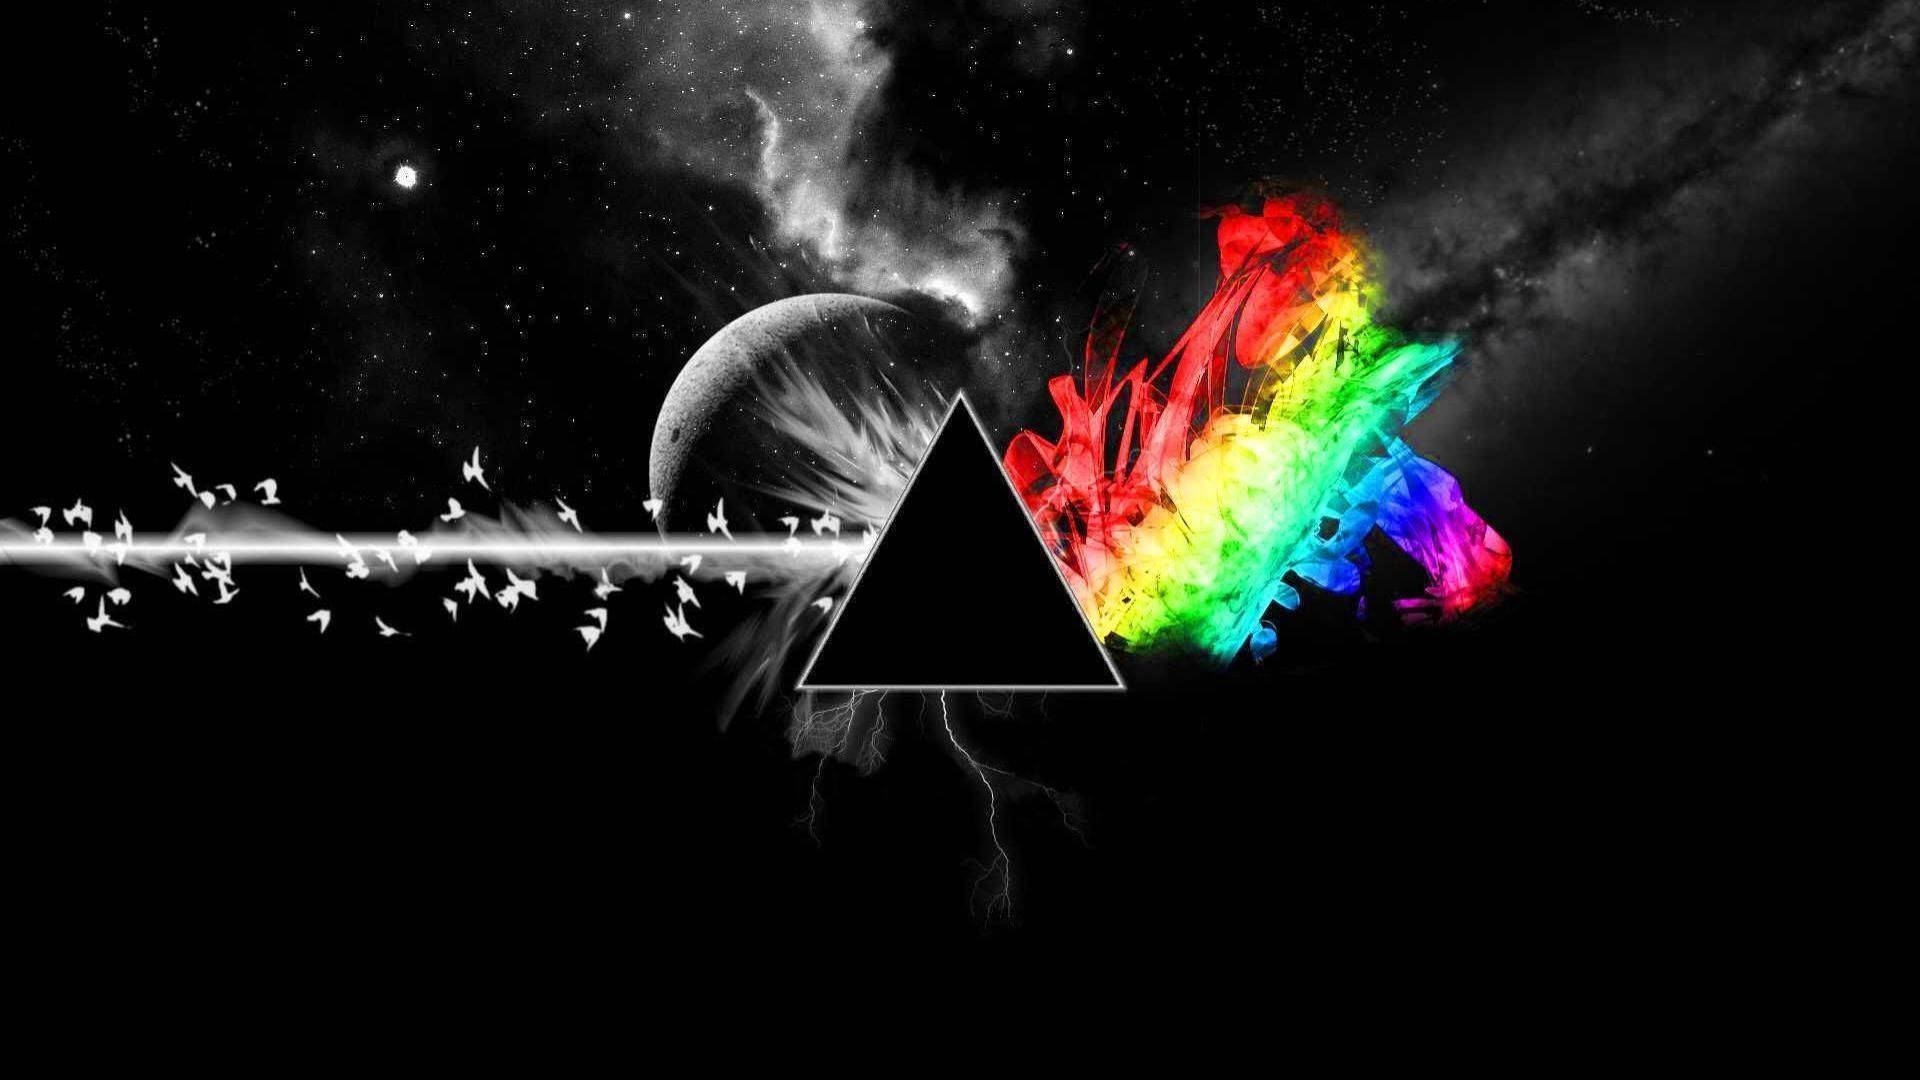 Black Triangle Prism In Space Background